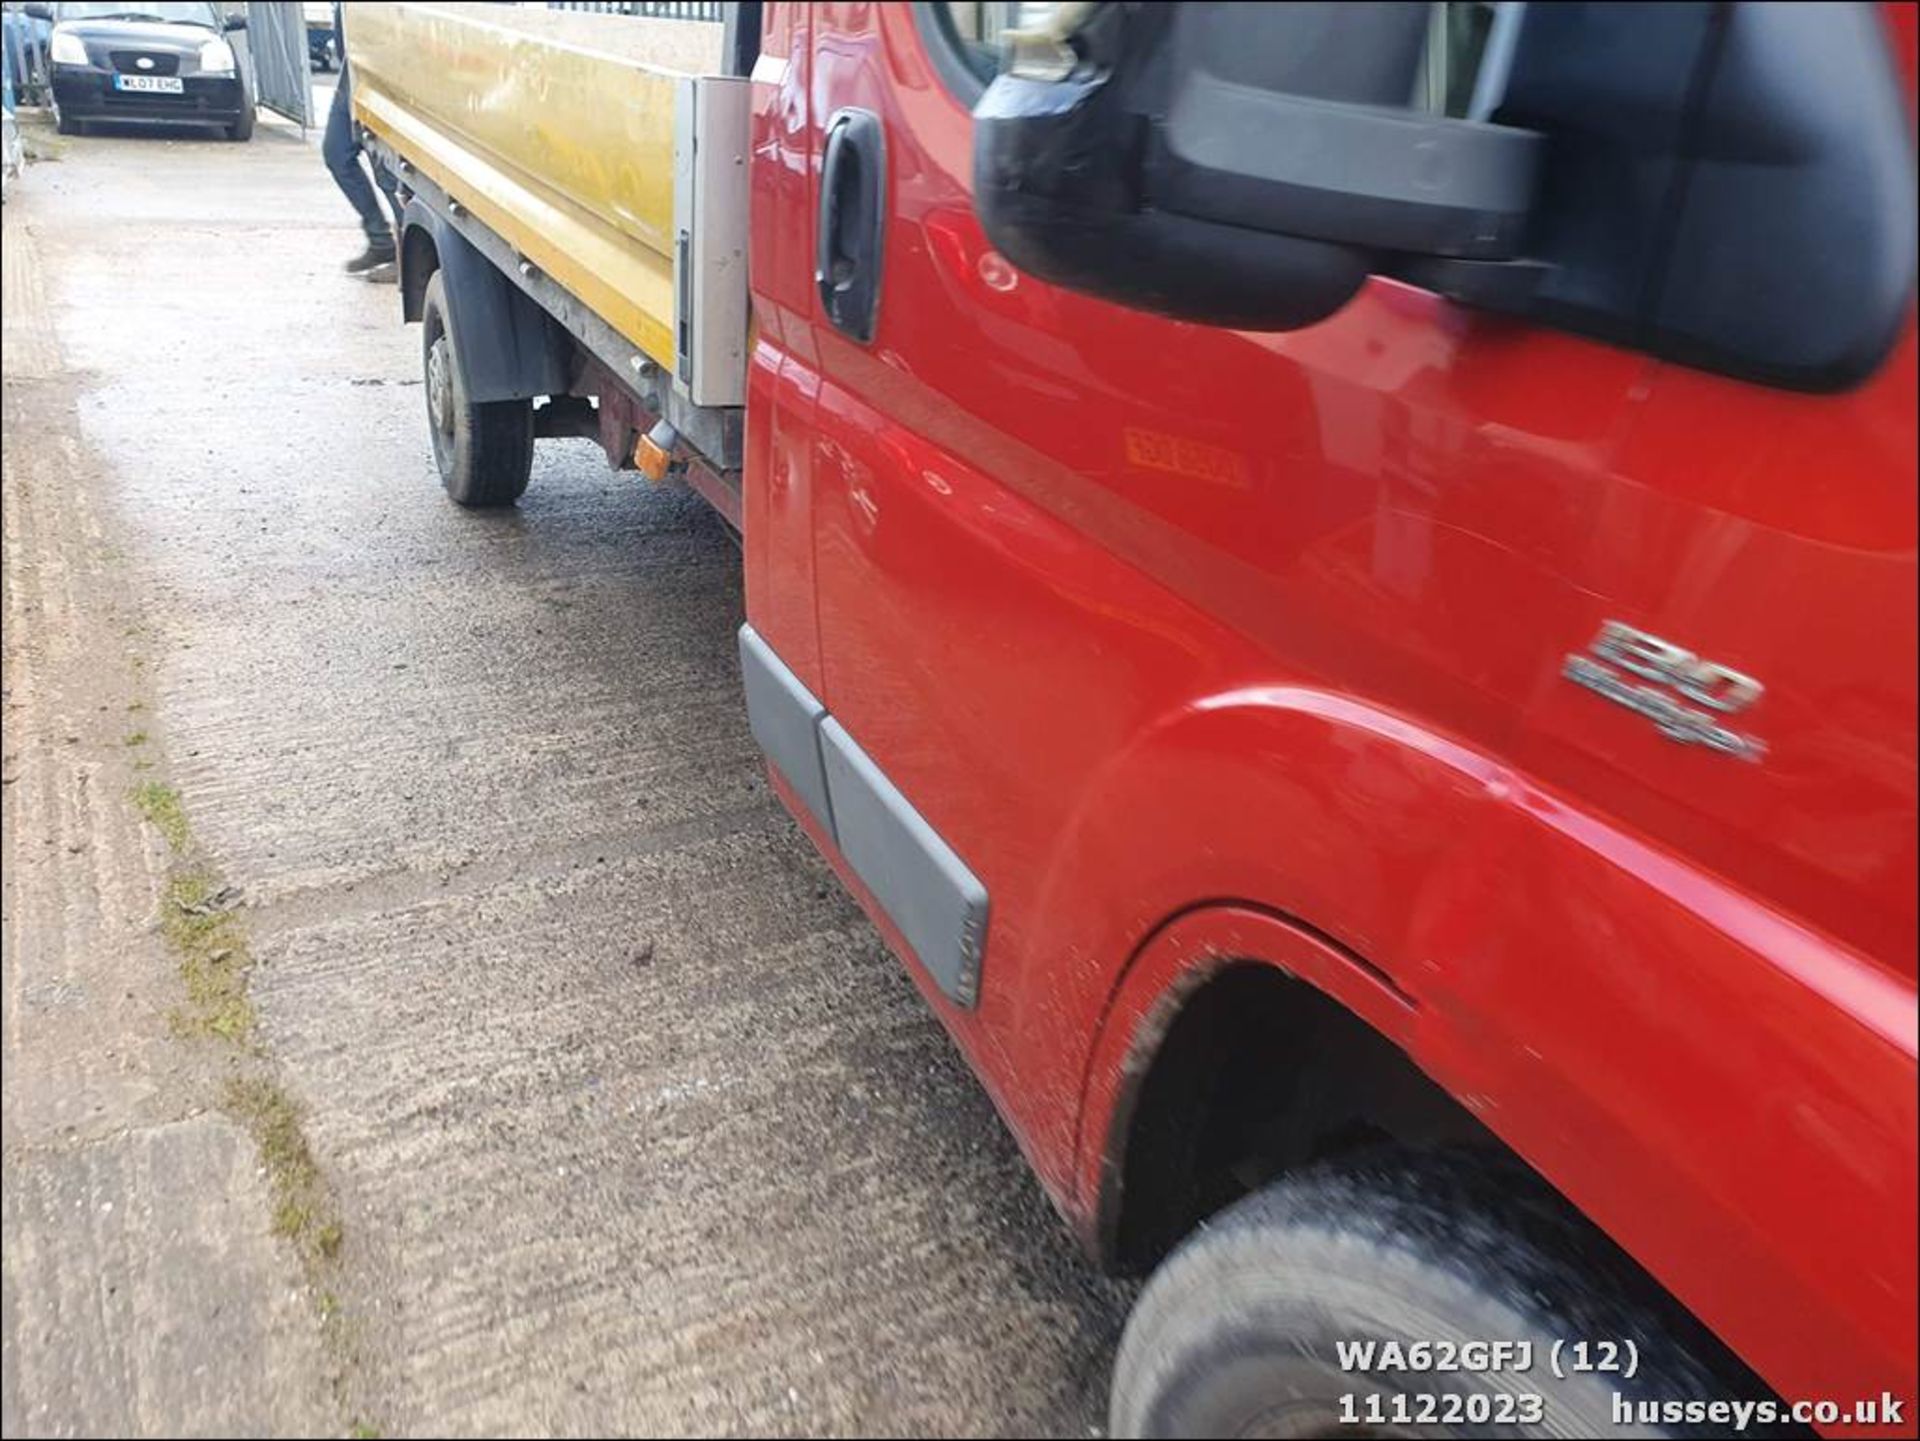 12/62 FIAT DUCATO 35 MULTIJET - 2287cc 2.dr Flat Bed (Red) - Image 13 of 52